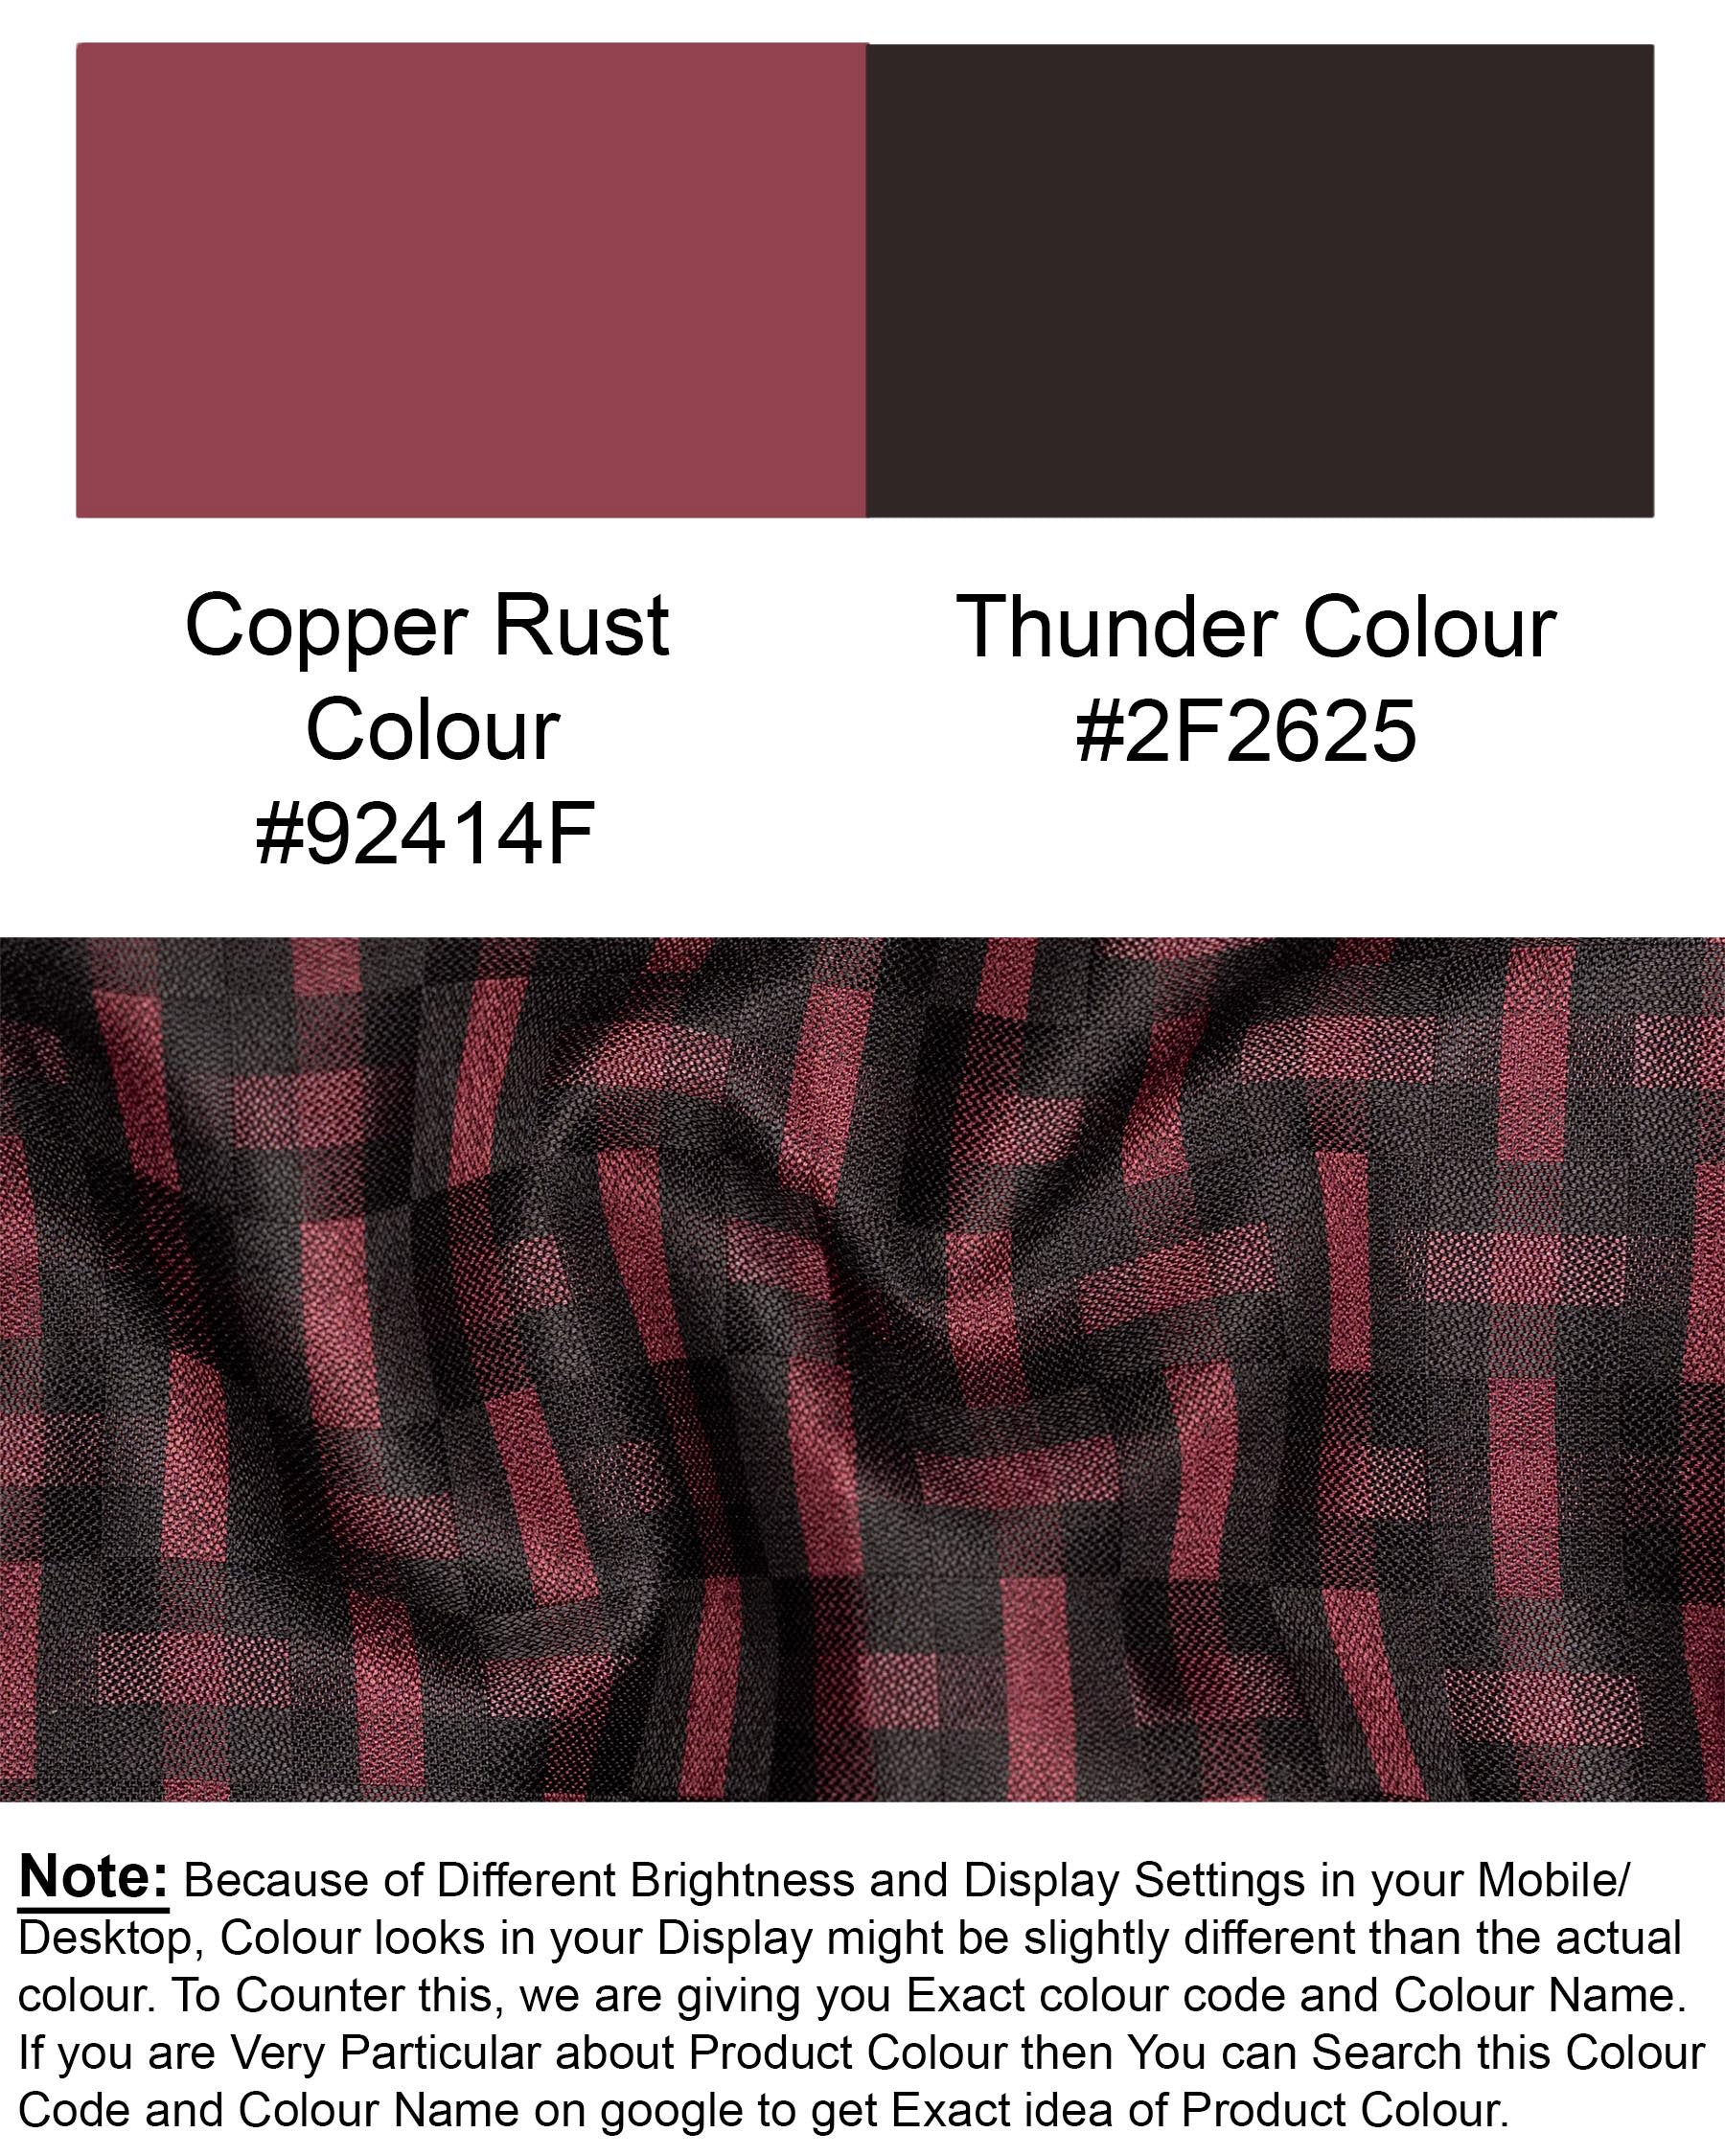 Copper Rust and Thunder Black Cross Buttoned Bandhgala Suit ST1744-CBG-36, ST1744-CBG-38, ST1744-CBG-40, ST1744-CBG-42, ST1744-CBG-44, ST1744-CBG-46, ST1744-CBG-48, ST1744-CBG-50, ST1744-CBG-52, ST1744-CBG-54, ST1744-CBG-56, ST1744-CBG-58, ST1744-CBG-60